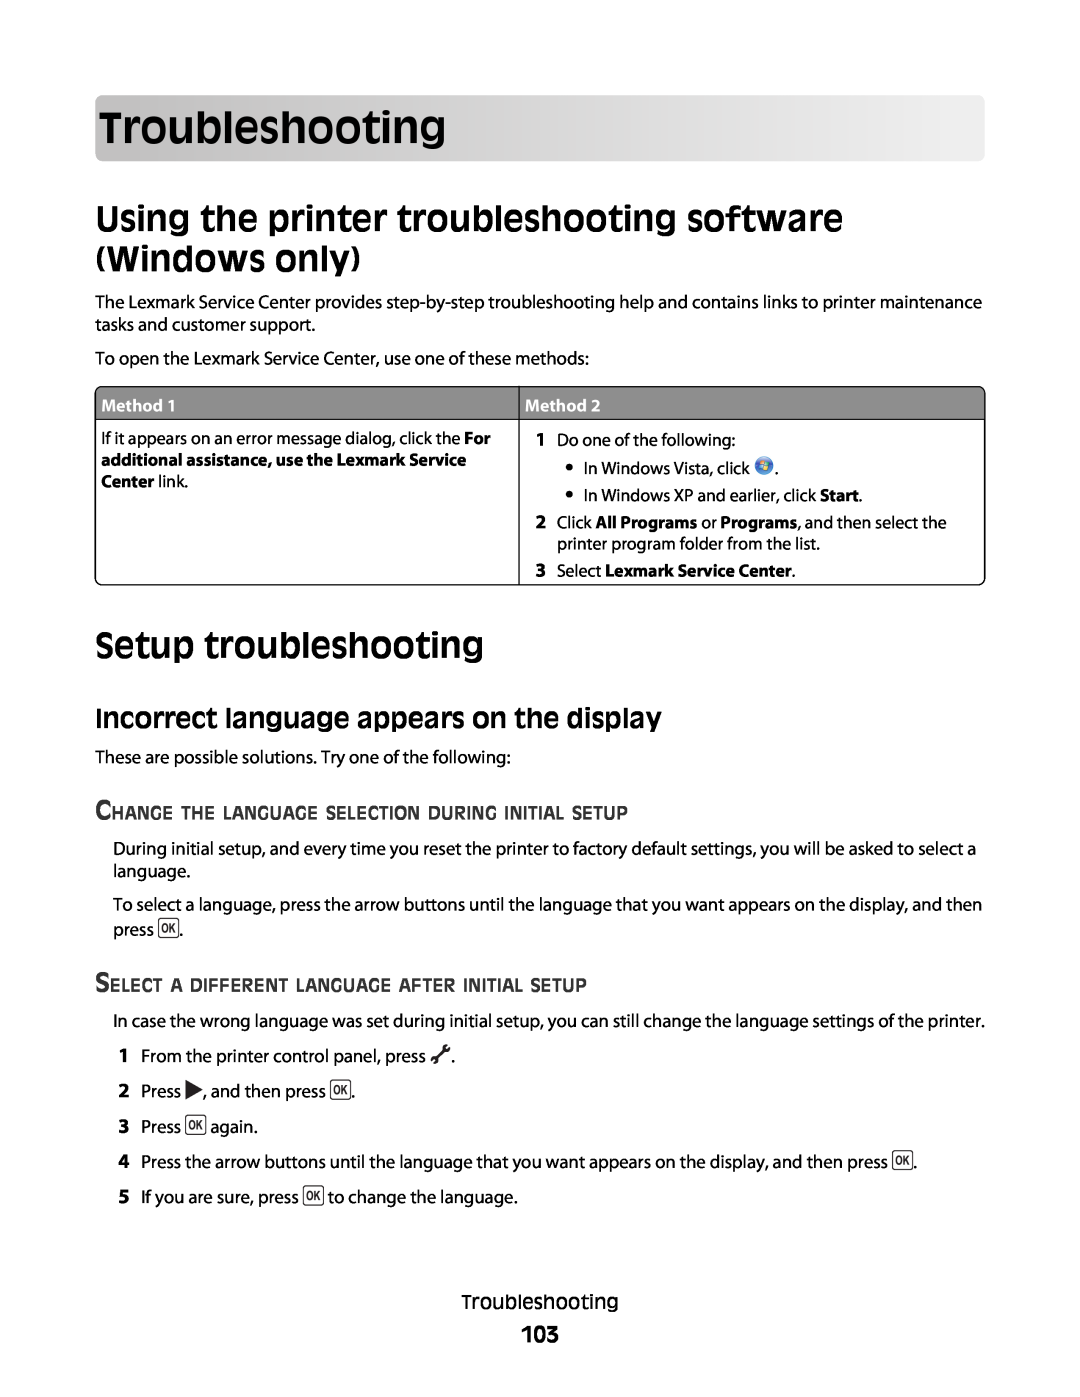 Lexmark 3600, 4600 manual Troubleshooting, Using the printer troubleshooting software Windows only, Setup troubleshooting 